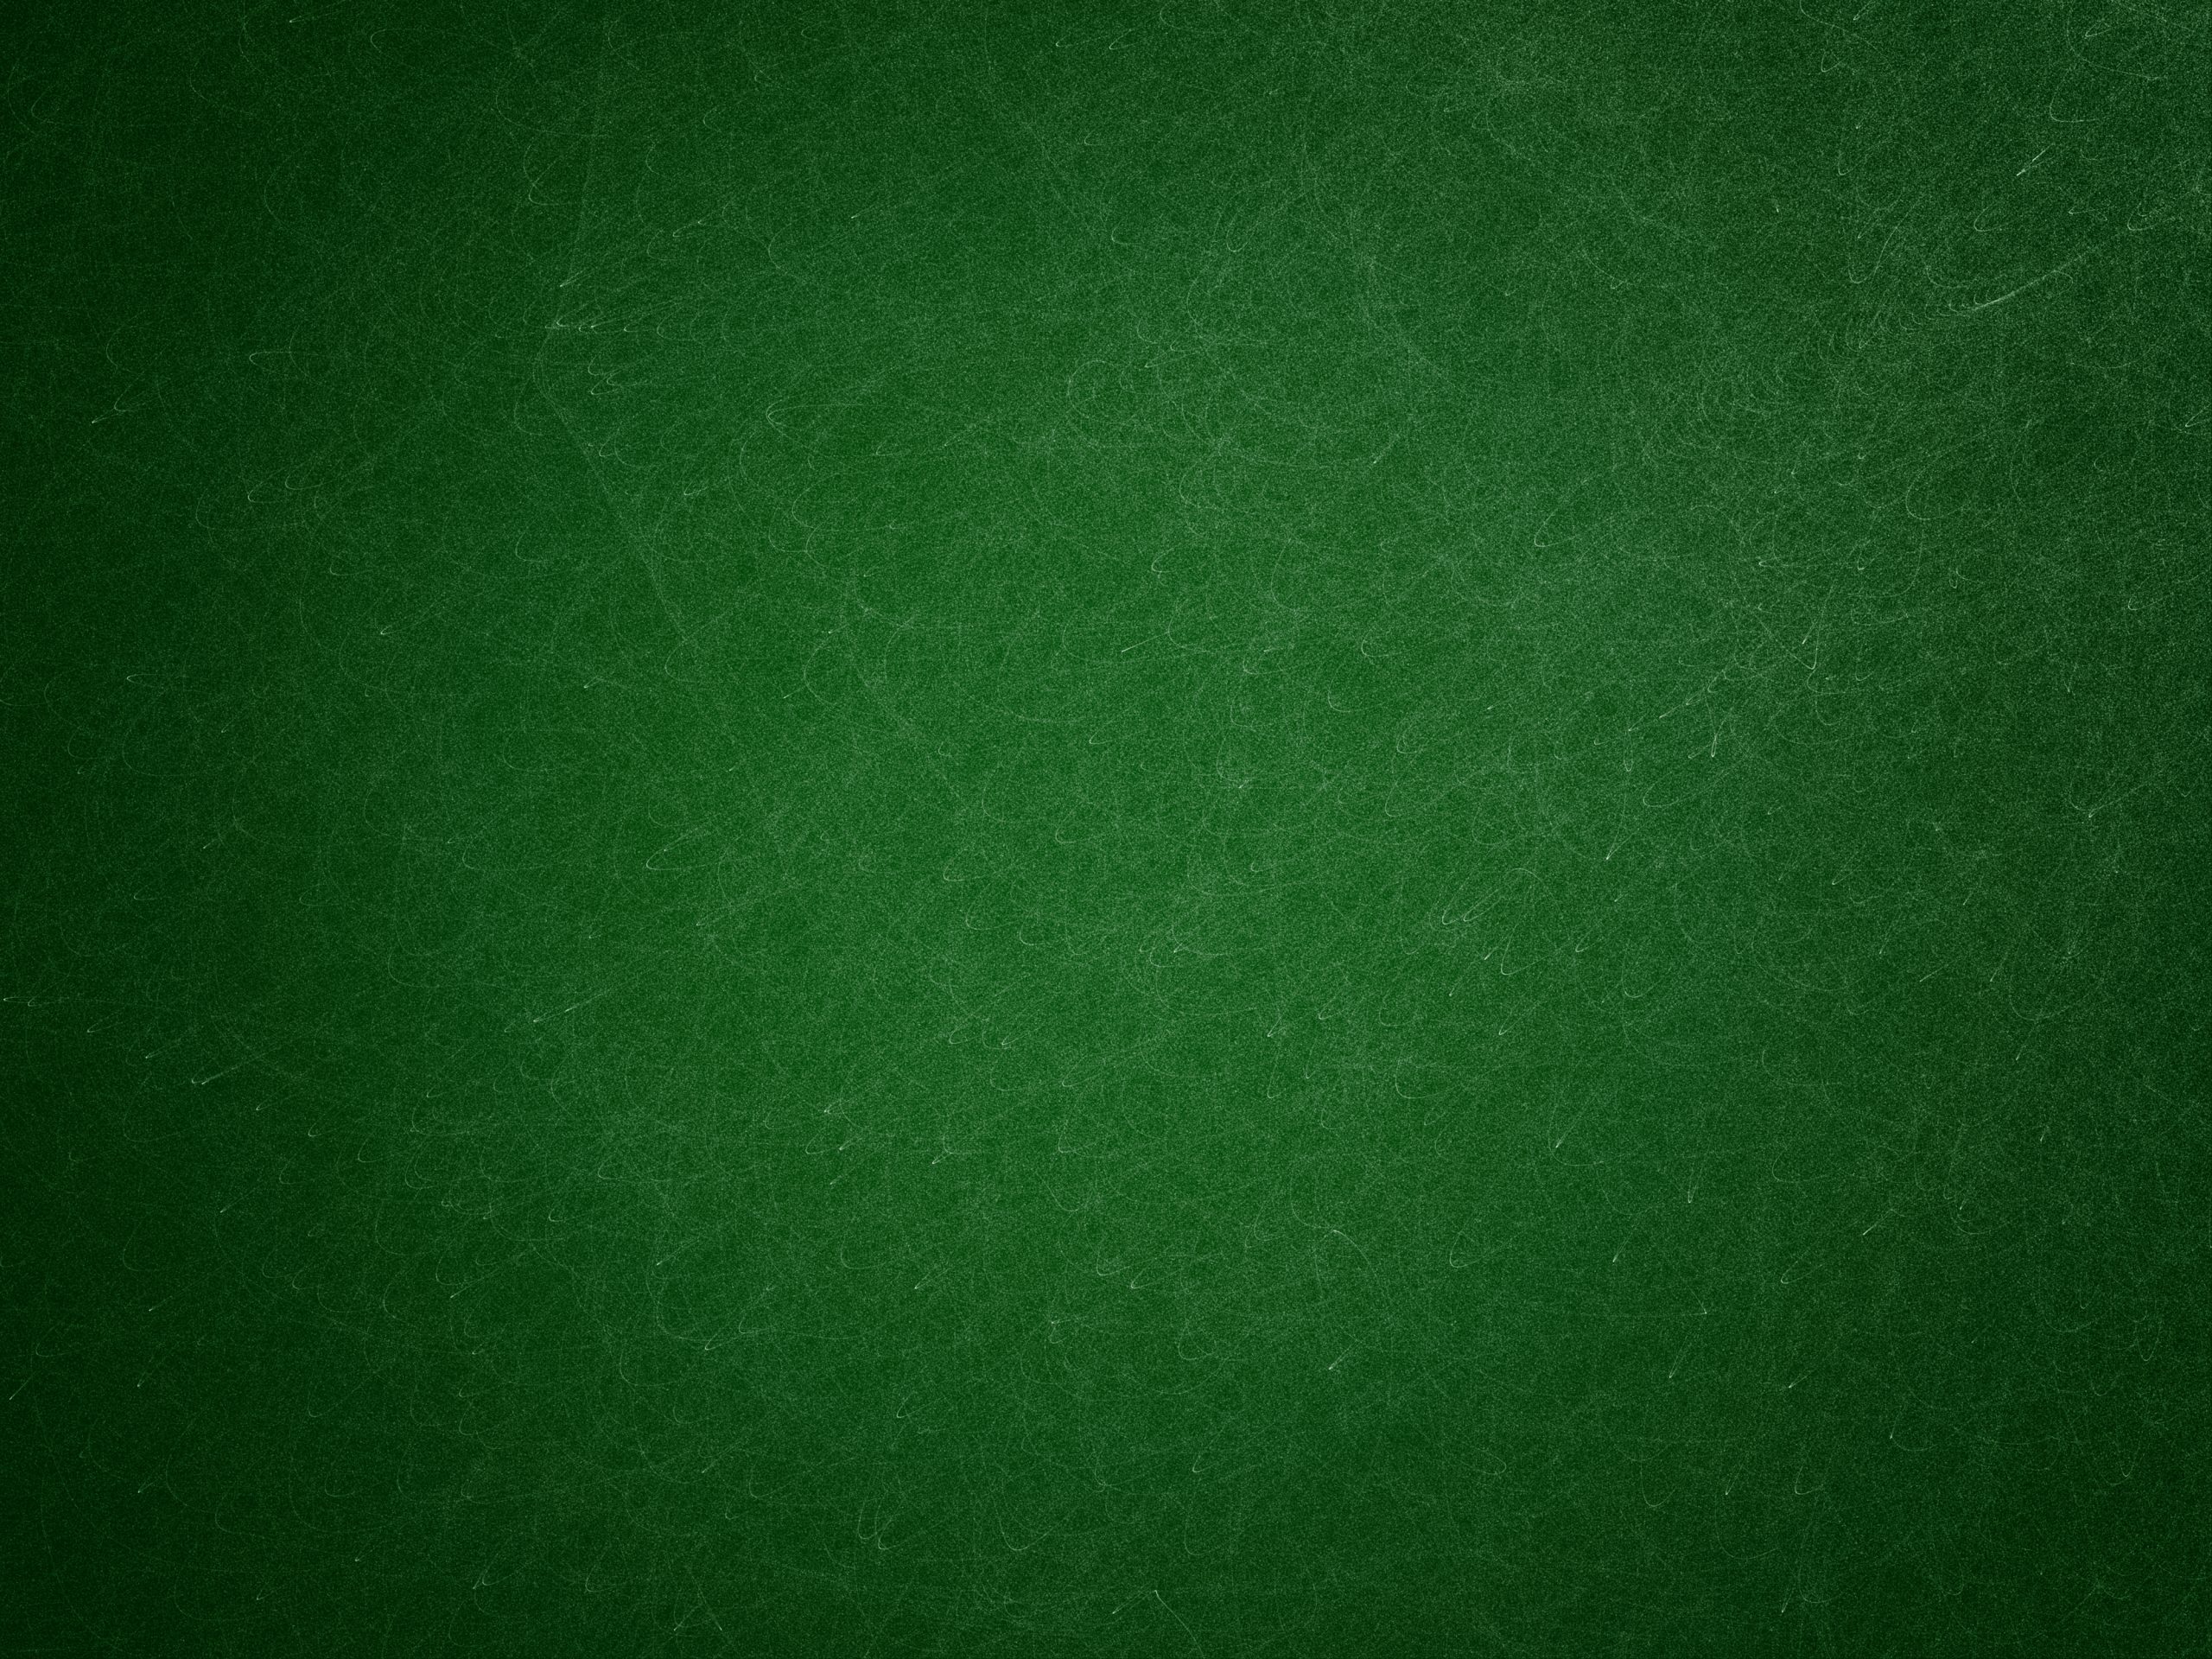 Abstract Green Background with vignette edges.